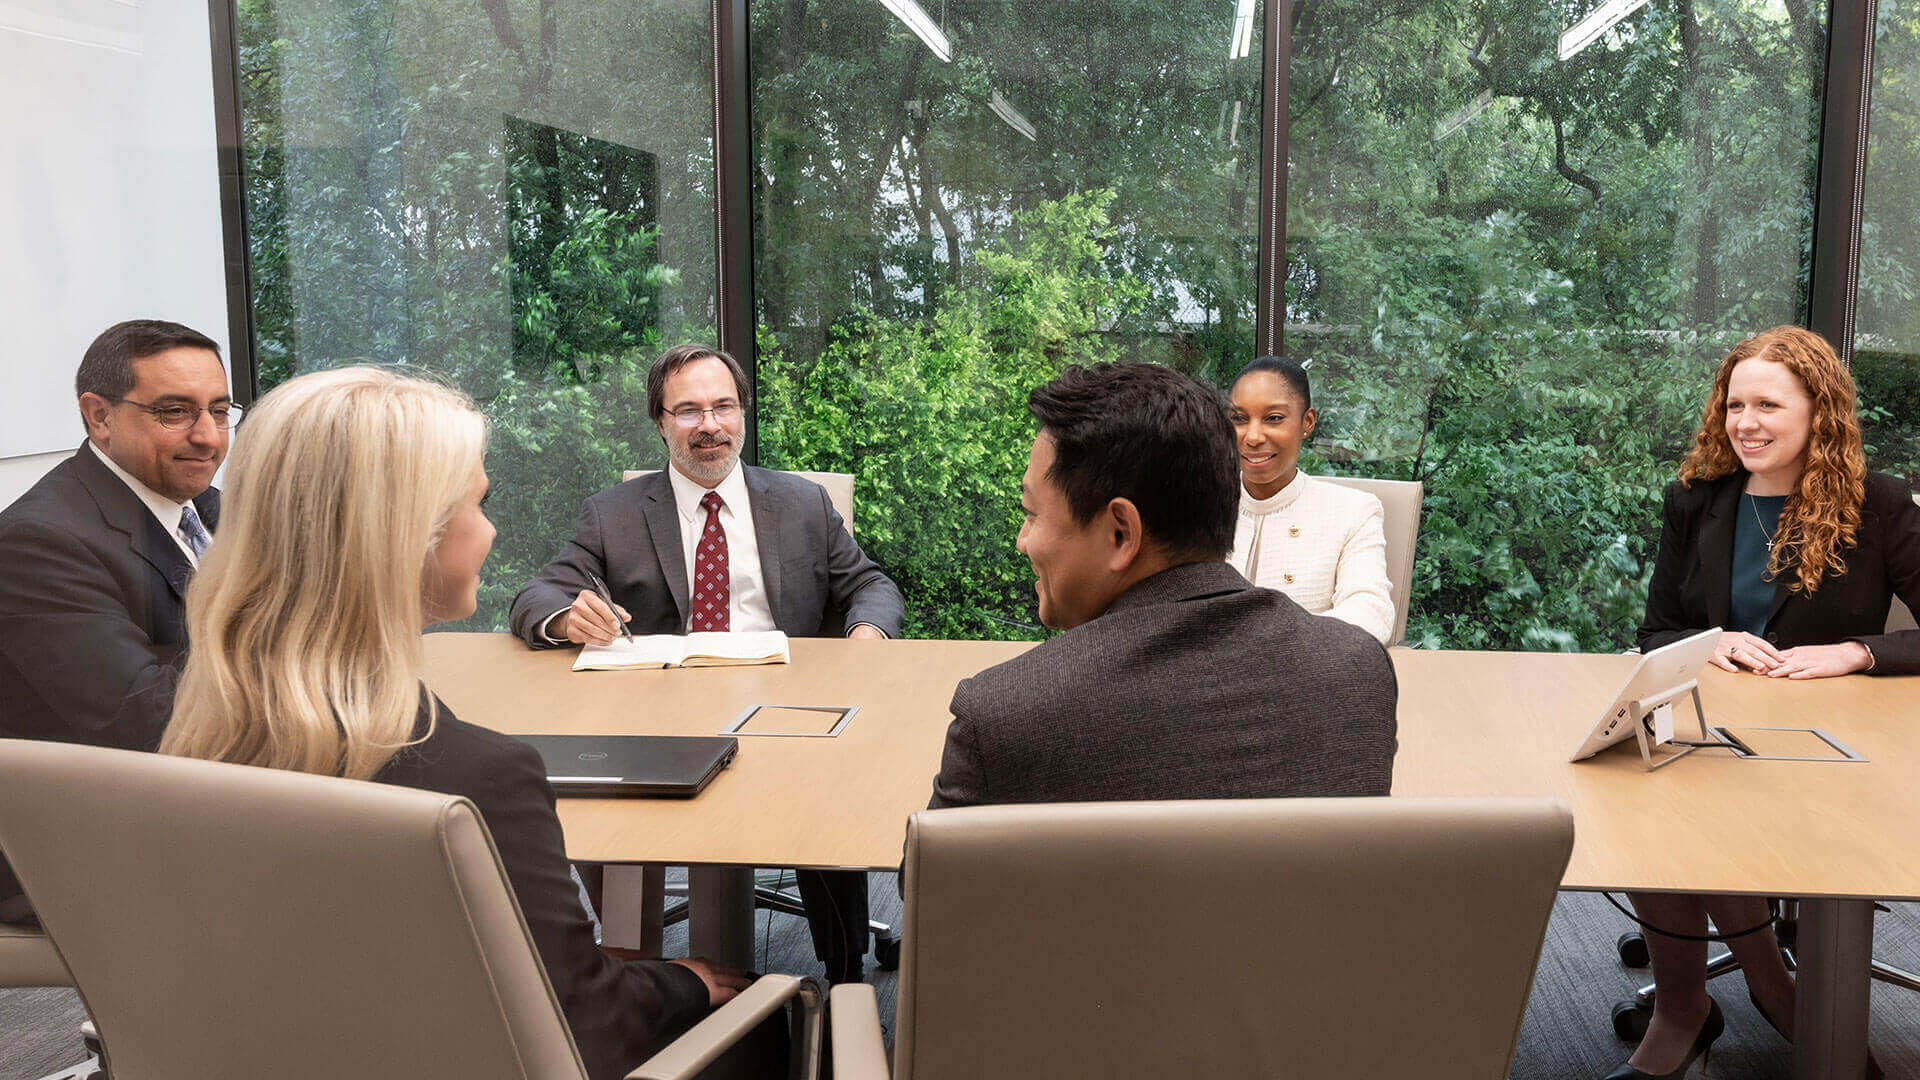 Three men and three women surround a conference table.